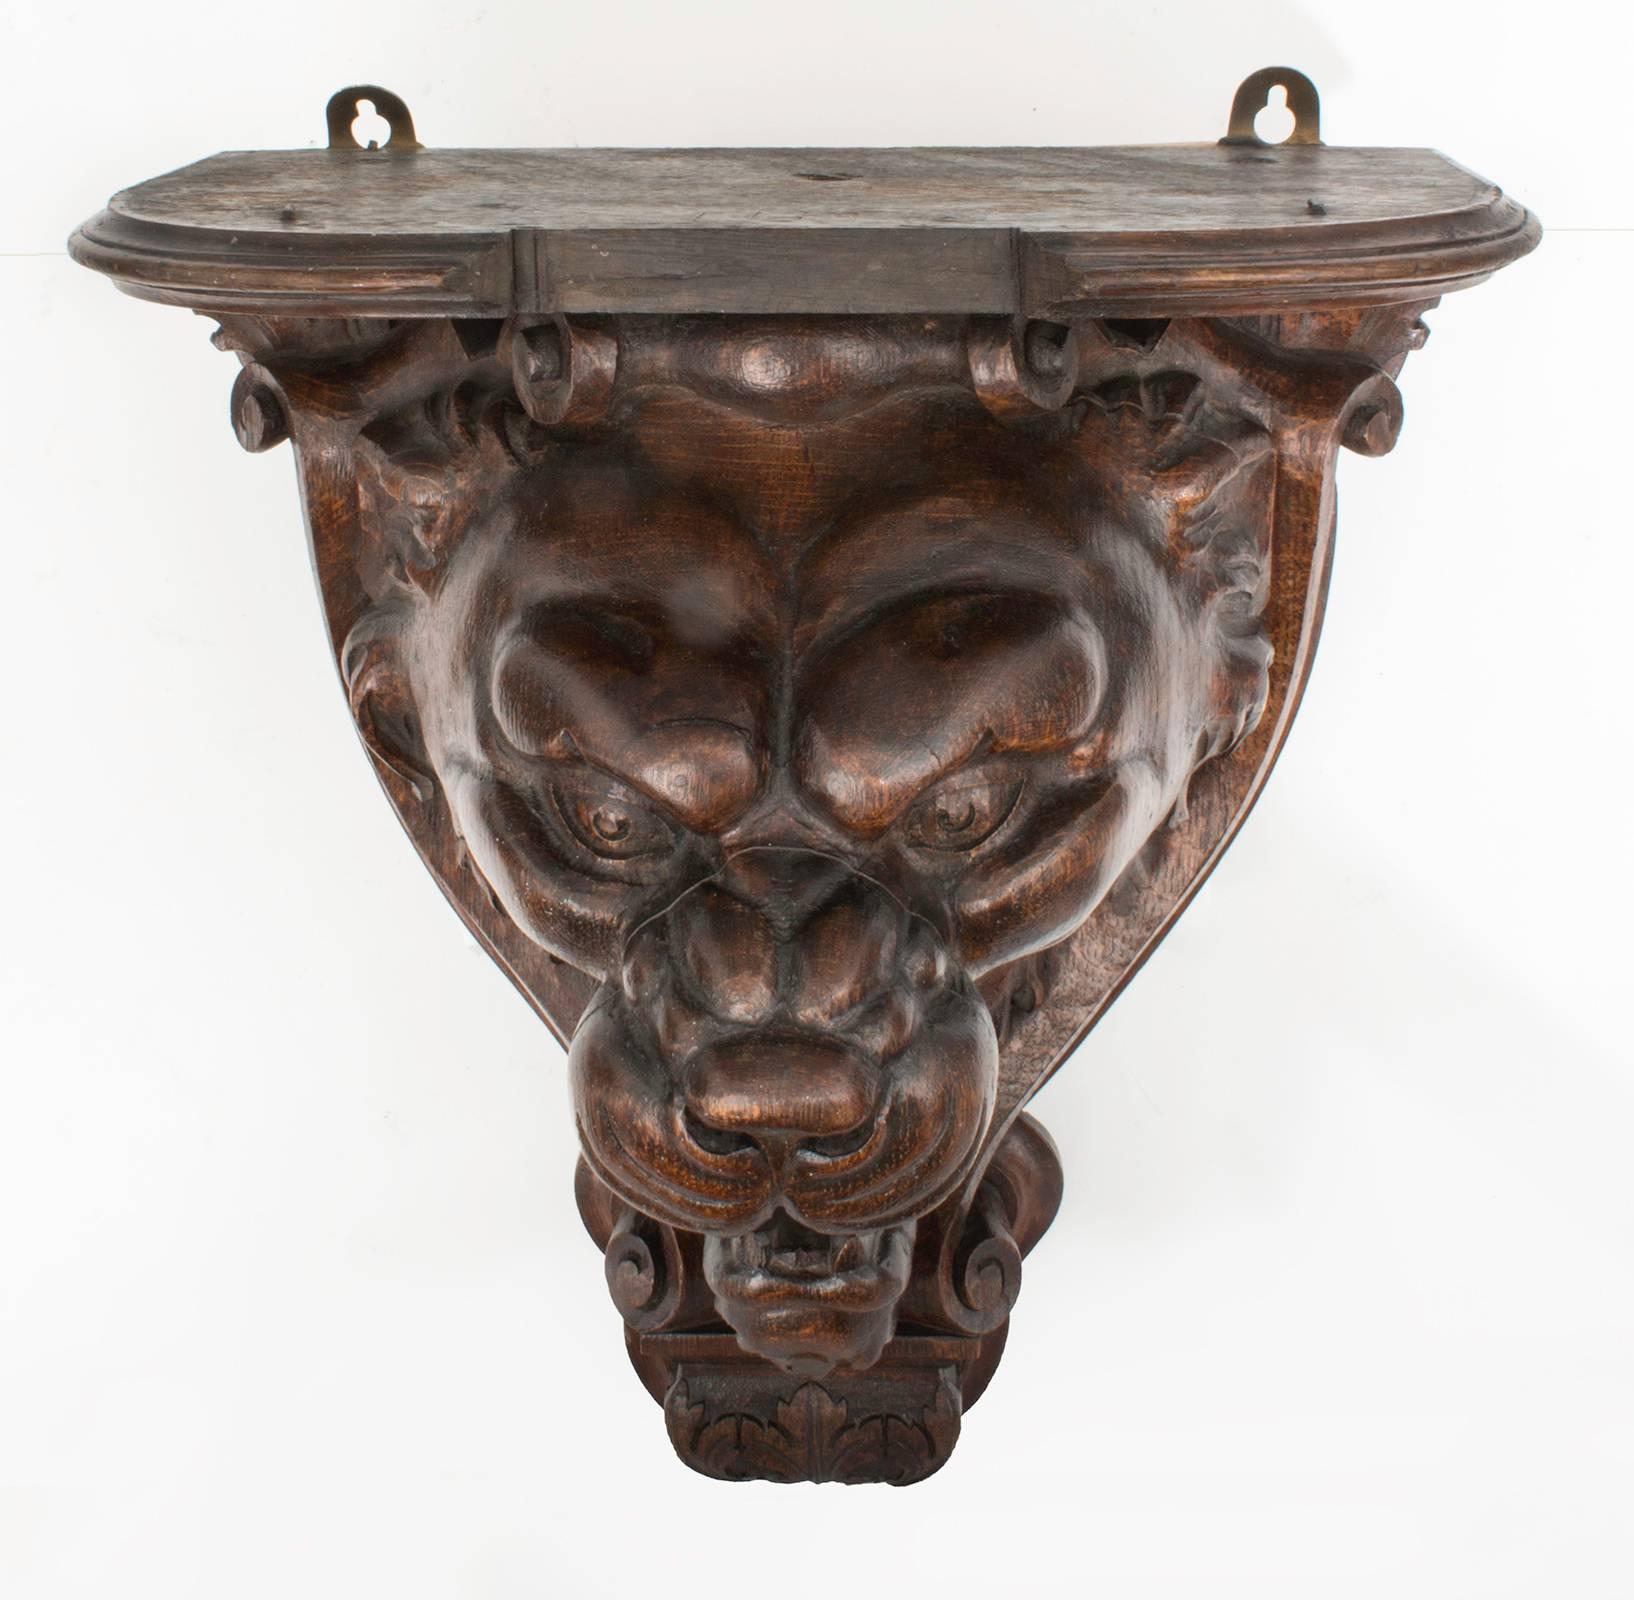 Dramatic solid wood carved lion wall shelf. Stained dark sculptural head.
Fierce looking with open mouth. Very well carved.
Top is a platform for display of plant or etc.